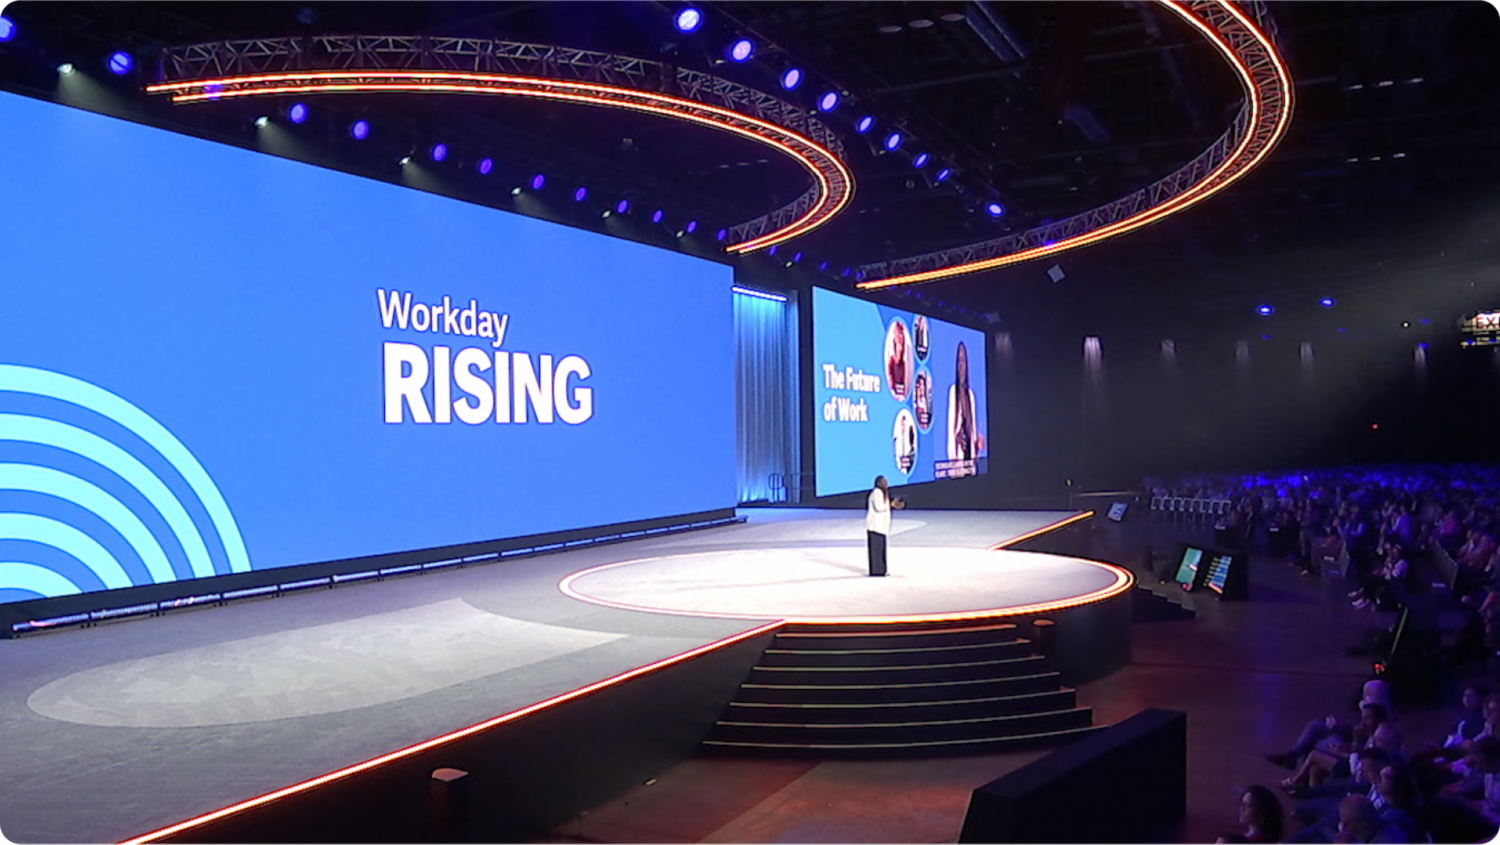 Watch video highlights from Workday Rising EMEA